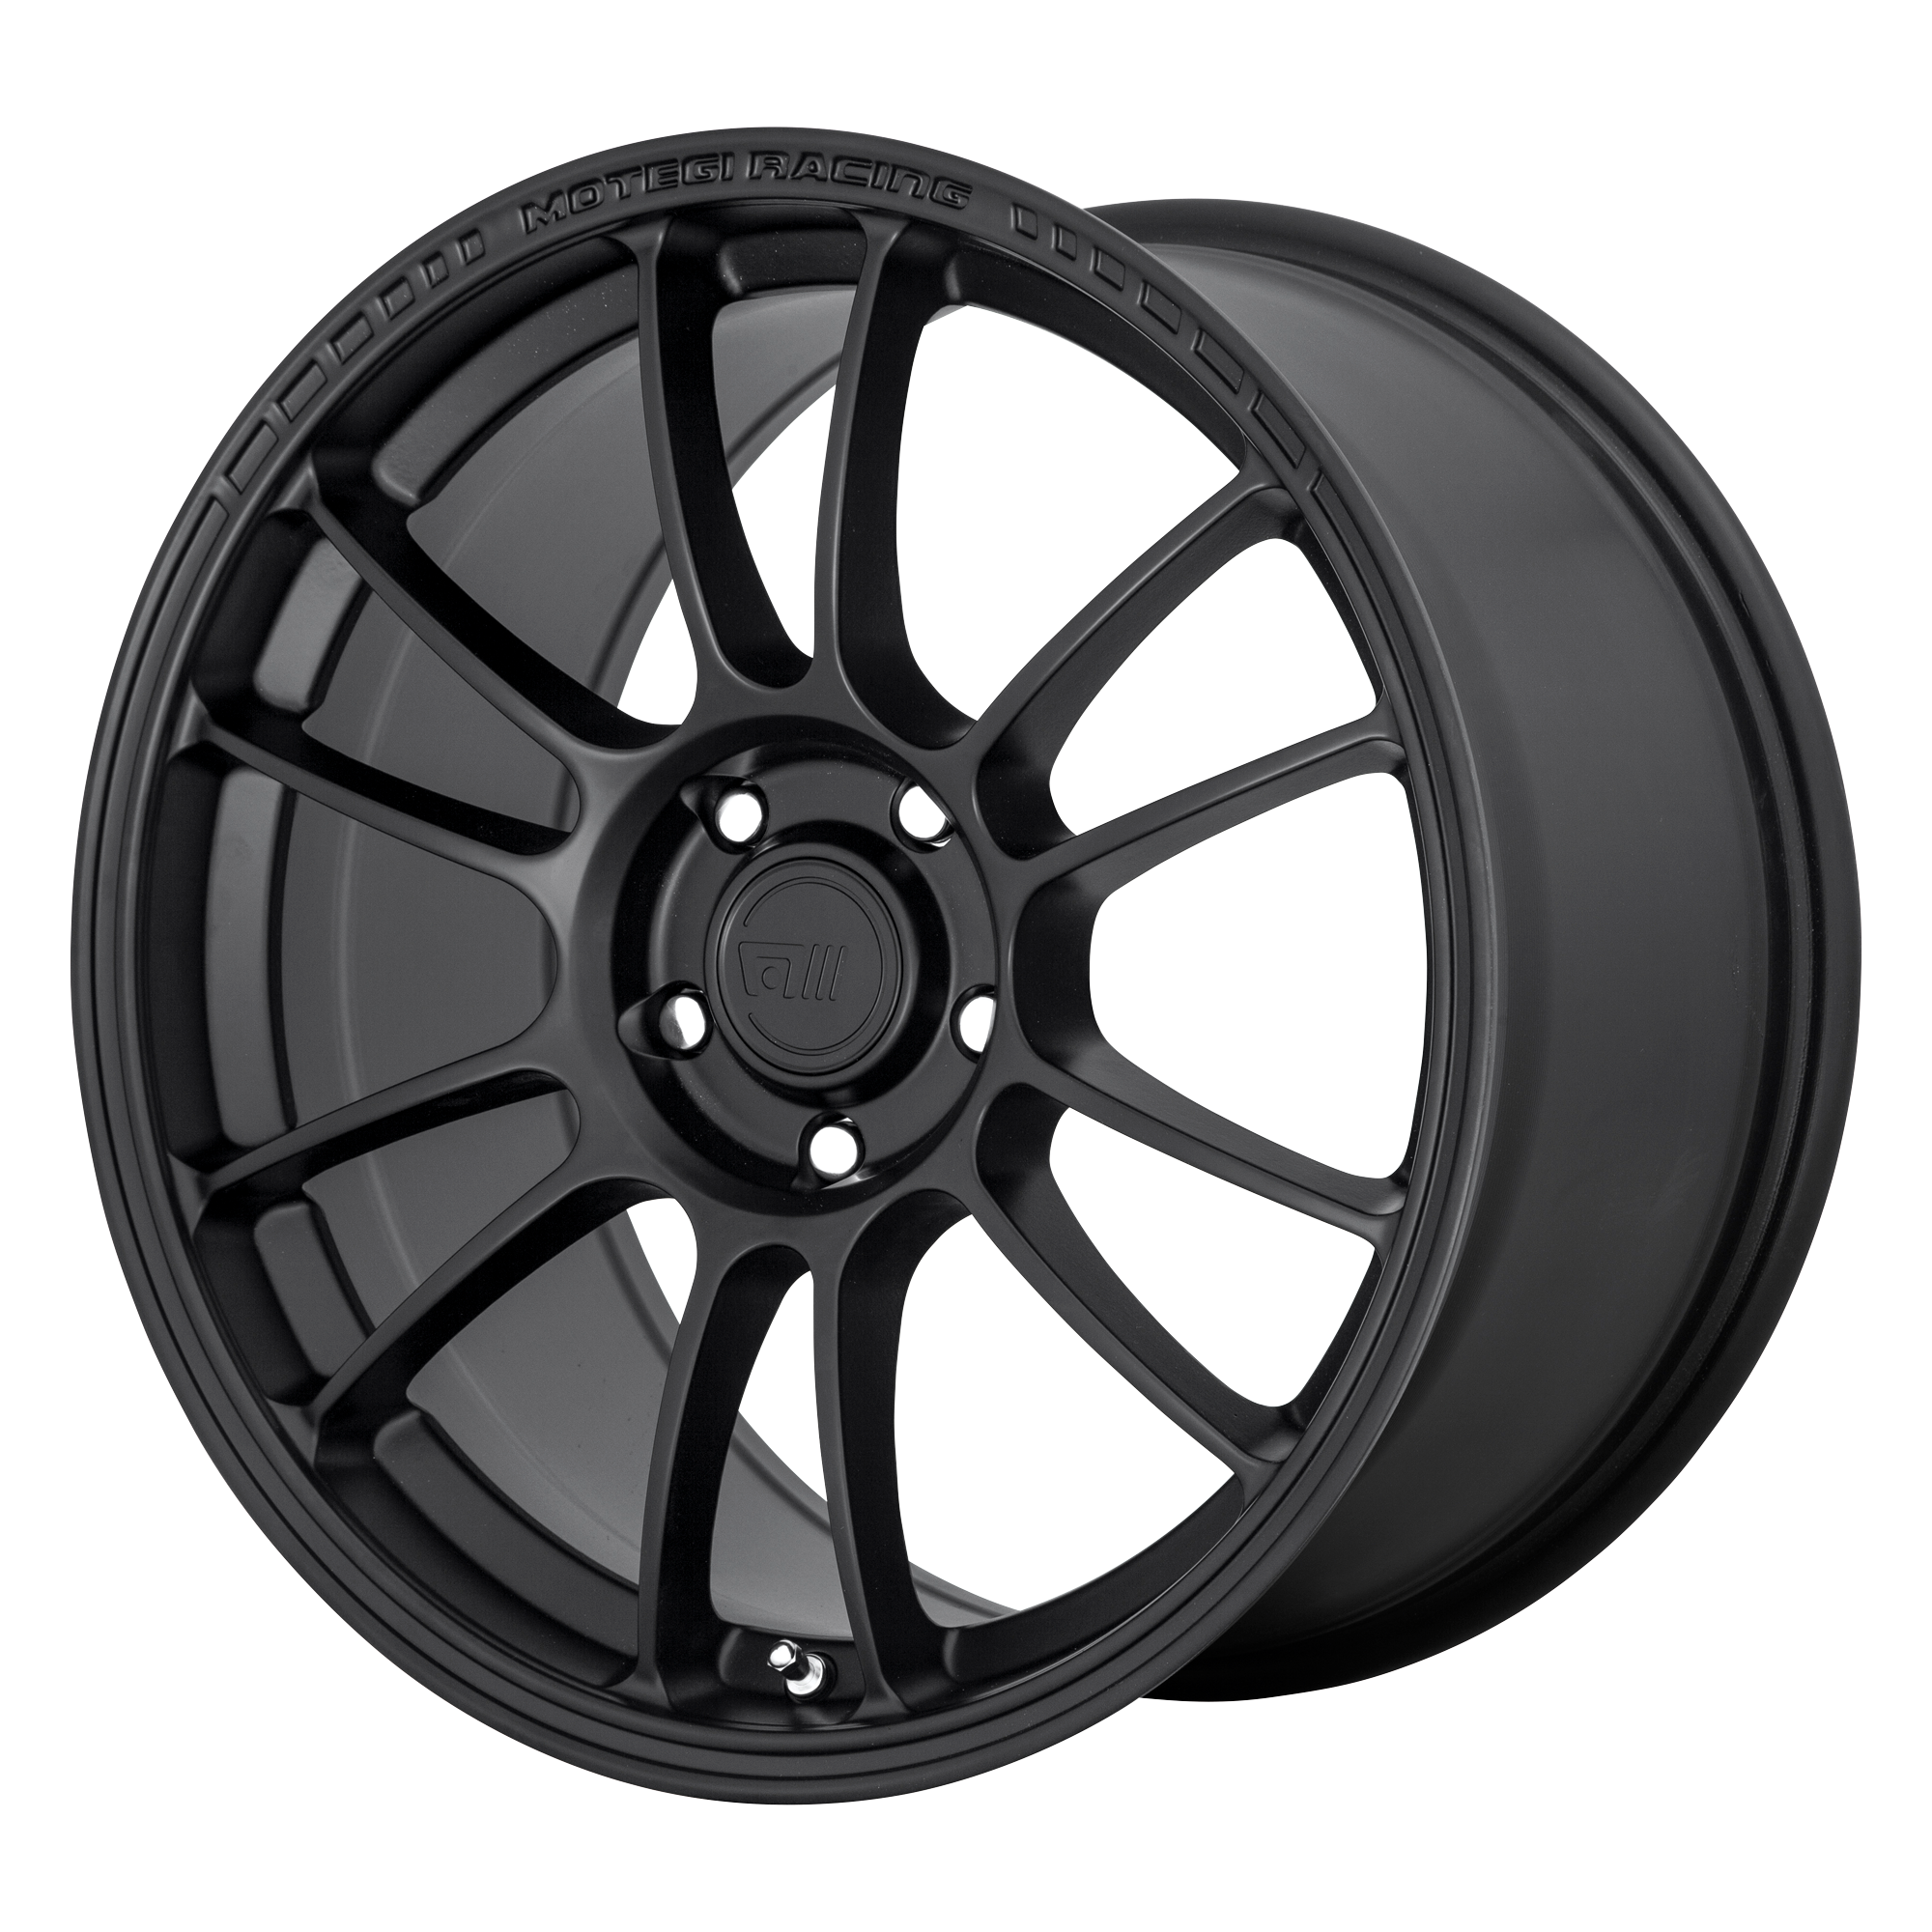 SS6 18x8.5 5x120.00 SATIN BLACK (35 mm) - Tires and Engine Performance